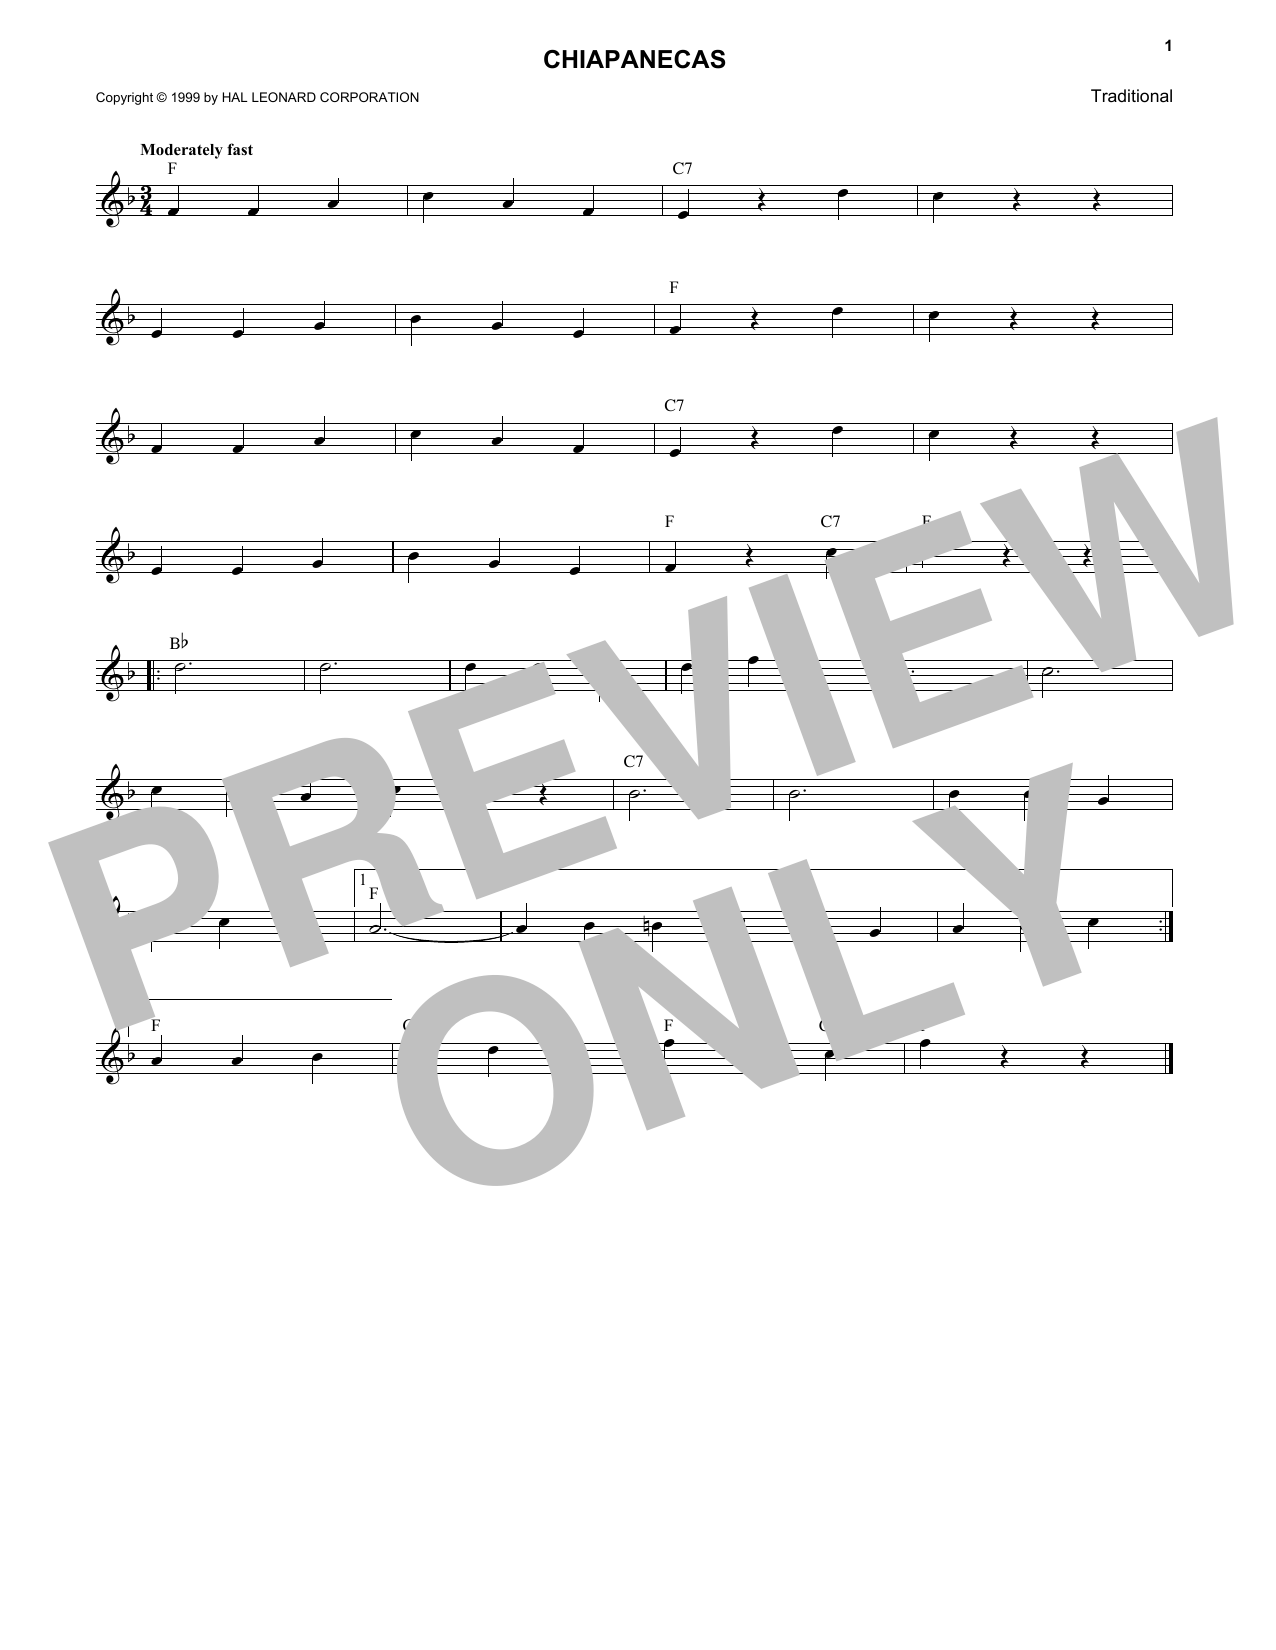 Mexican Folk Song Chiapanecas sheet music notes and chords. Download Printable PDF.